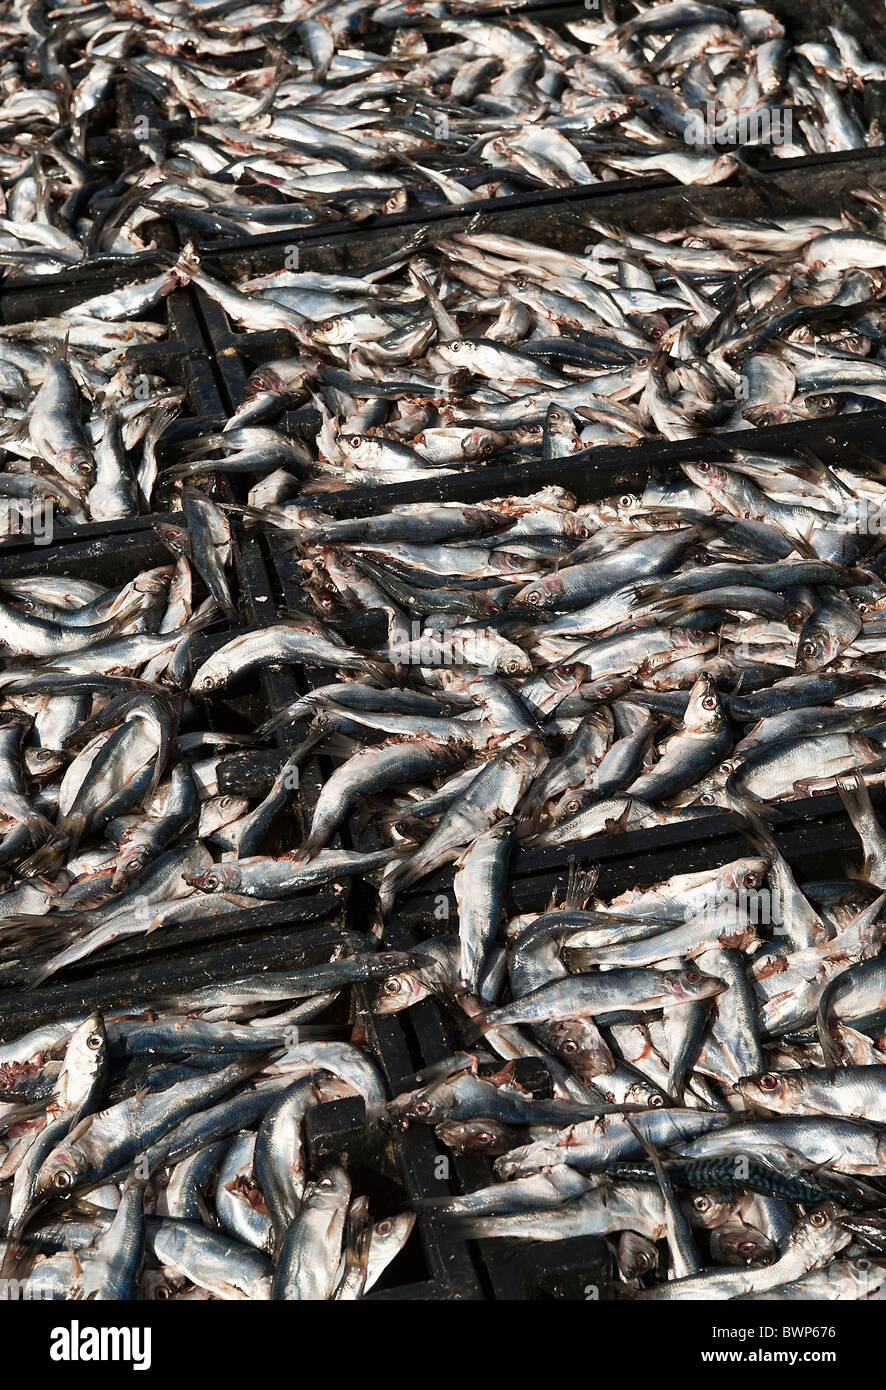 Herring fish used as bait by lobster fishermen. Stock Photo